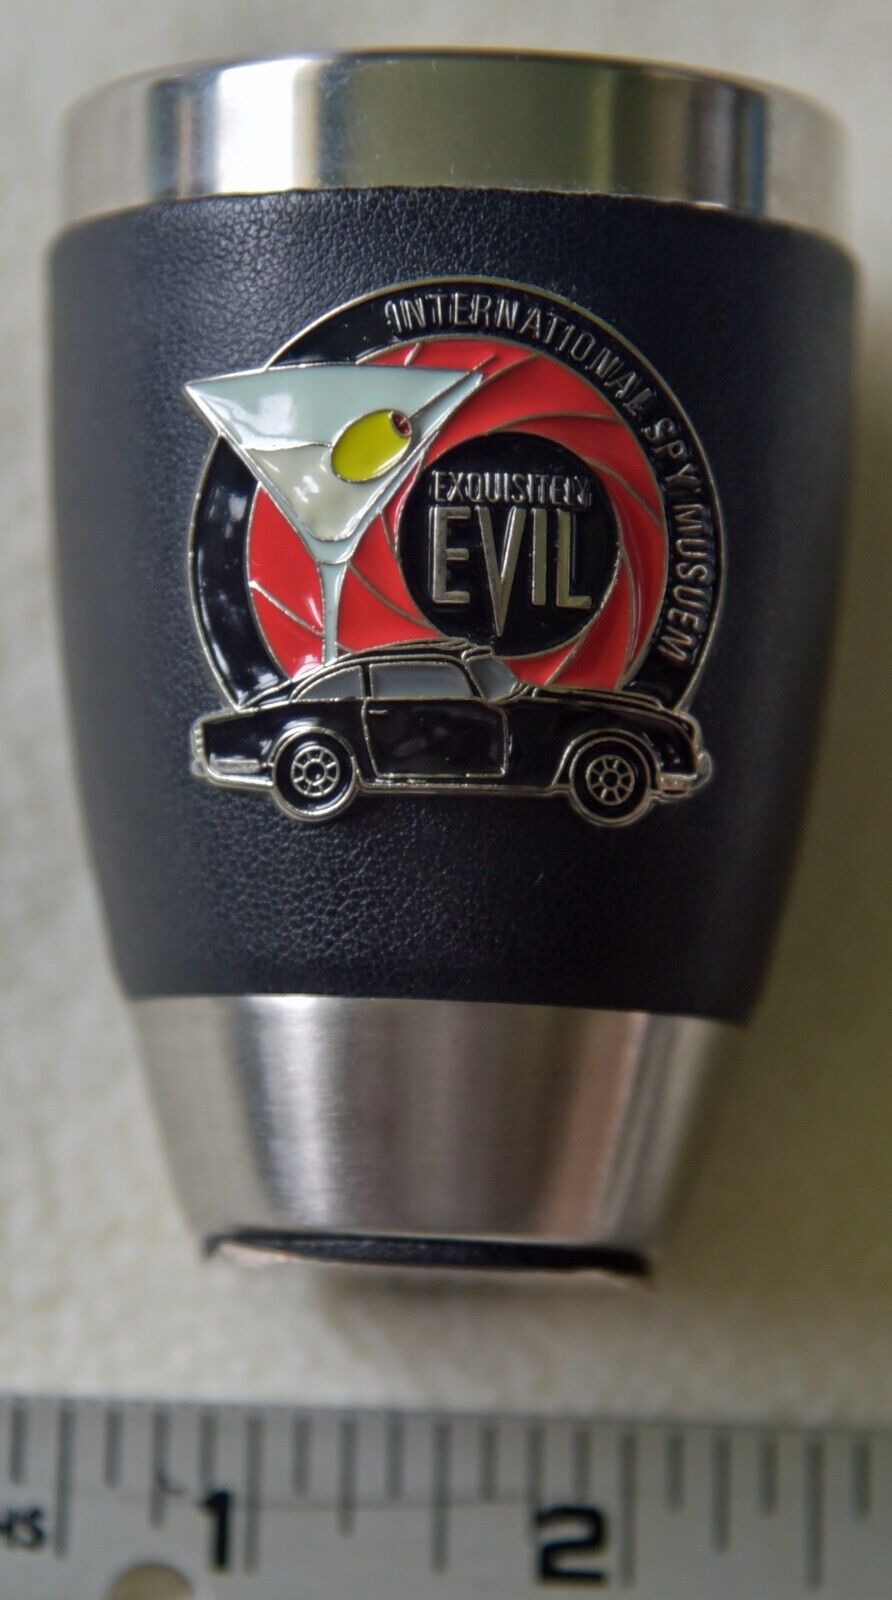 International Spy Museum Exquisitely Evil Leather & Metal Shot Glass